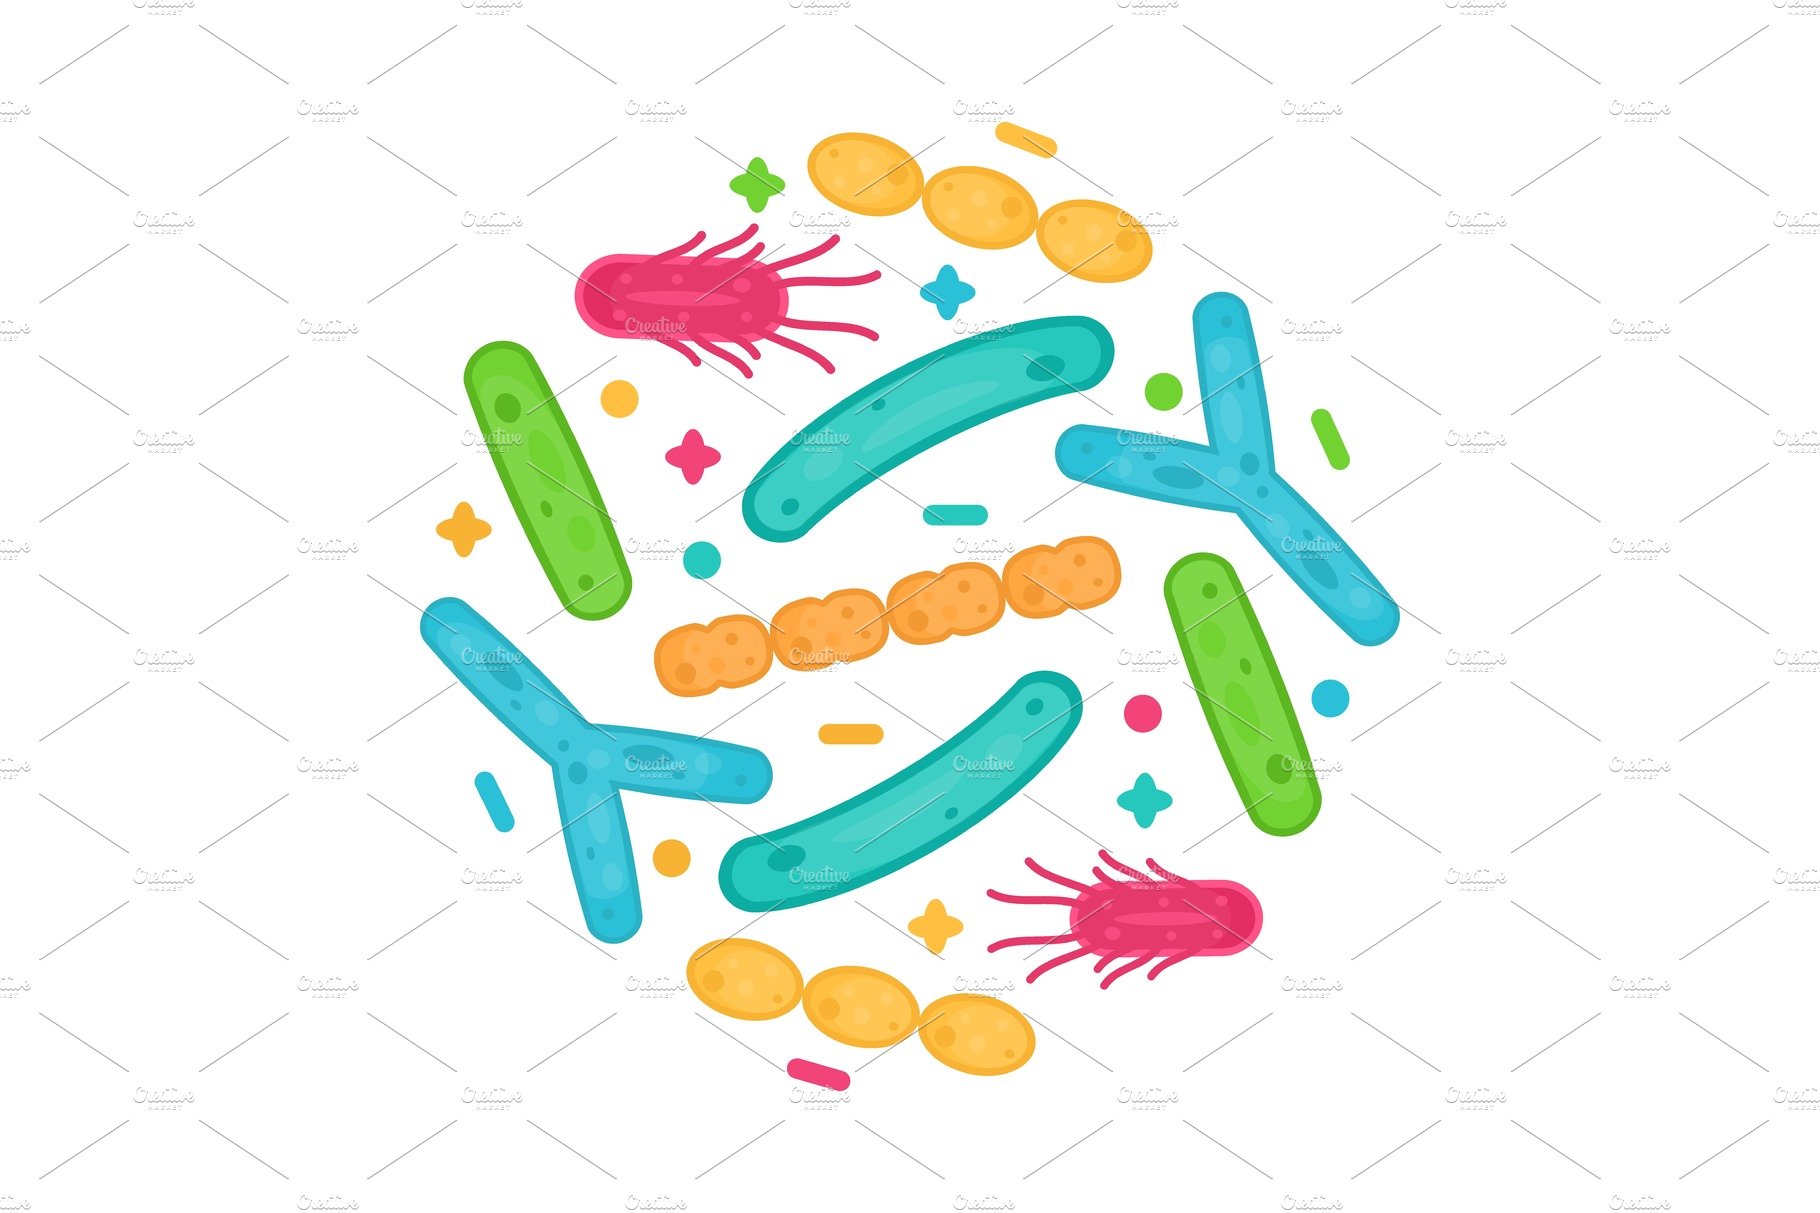 Probiotics bacteria and germs icon cover image.